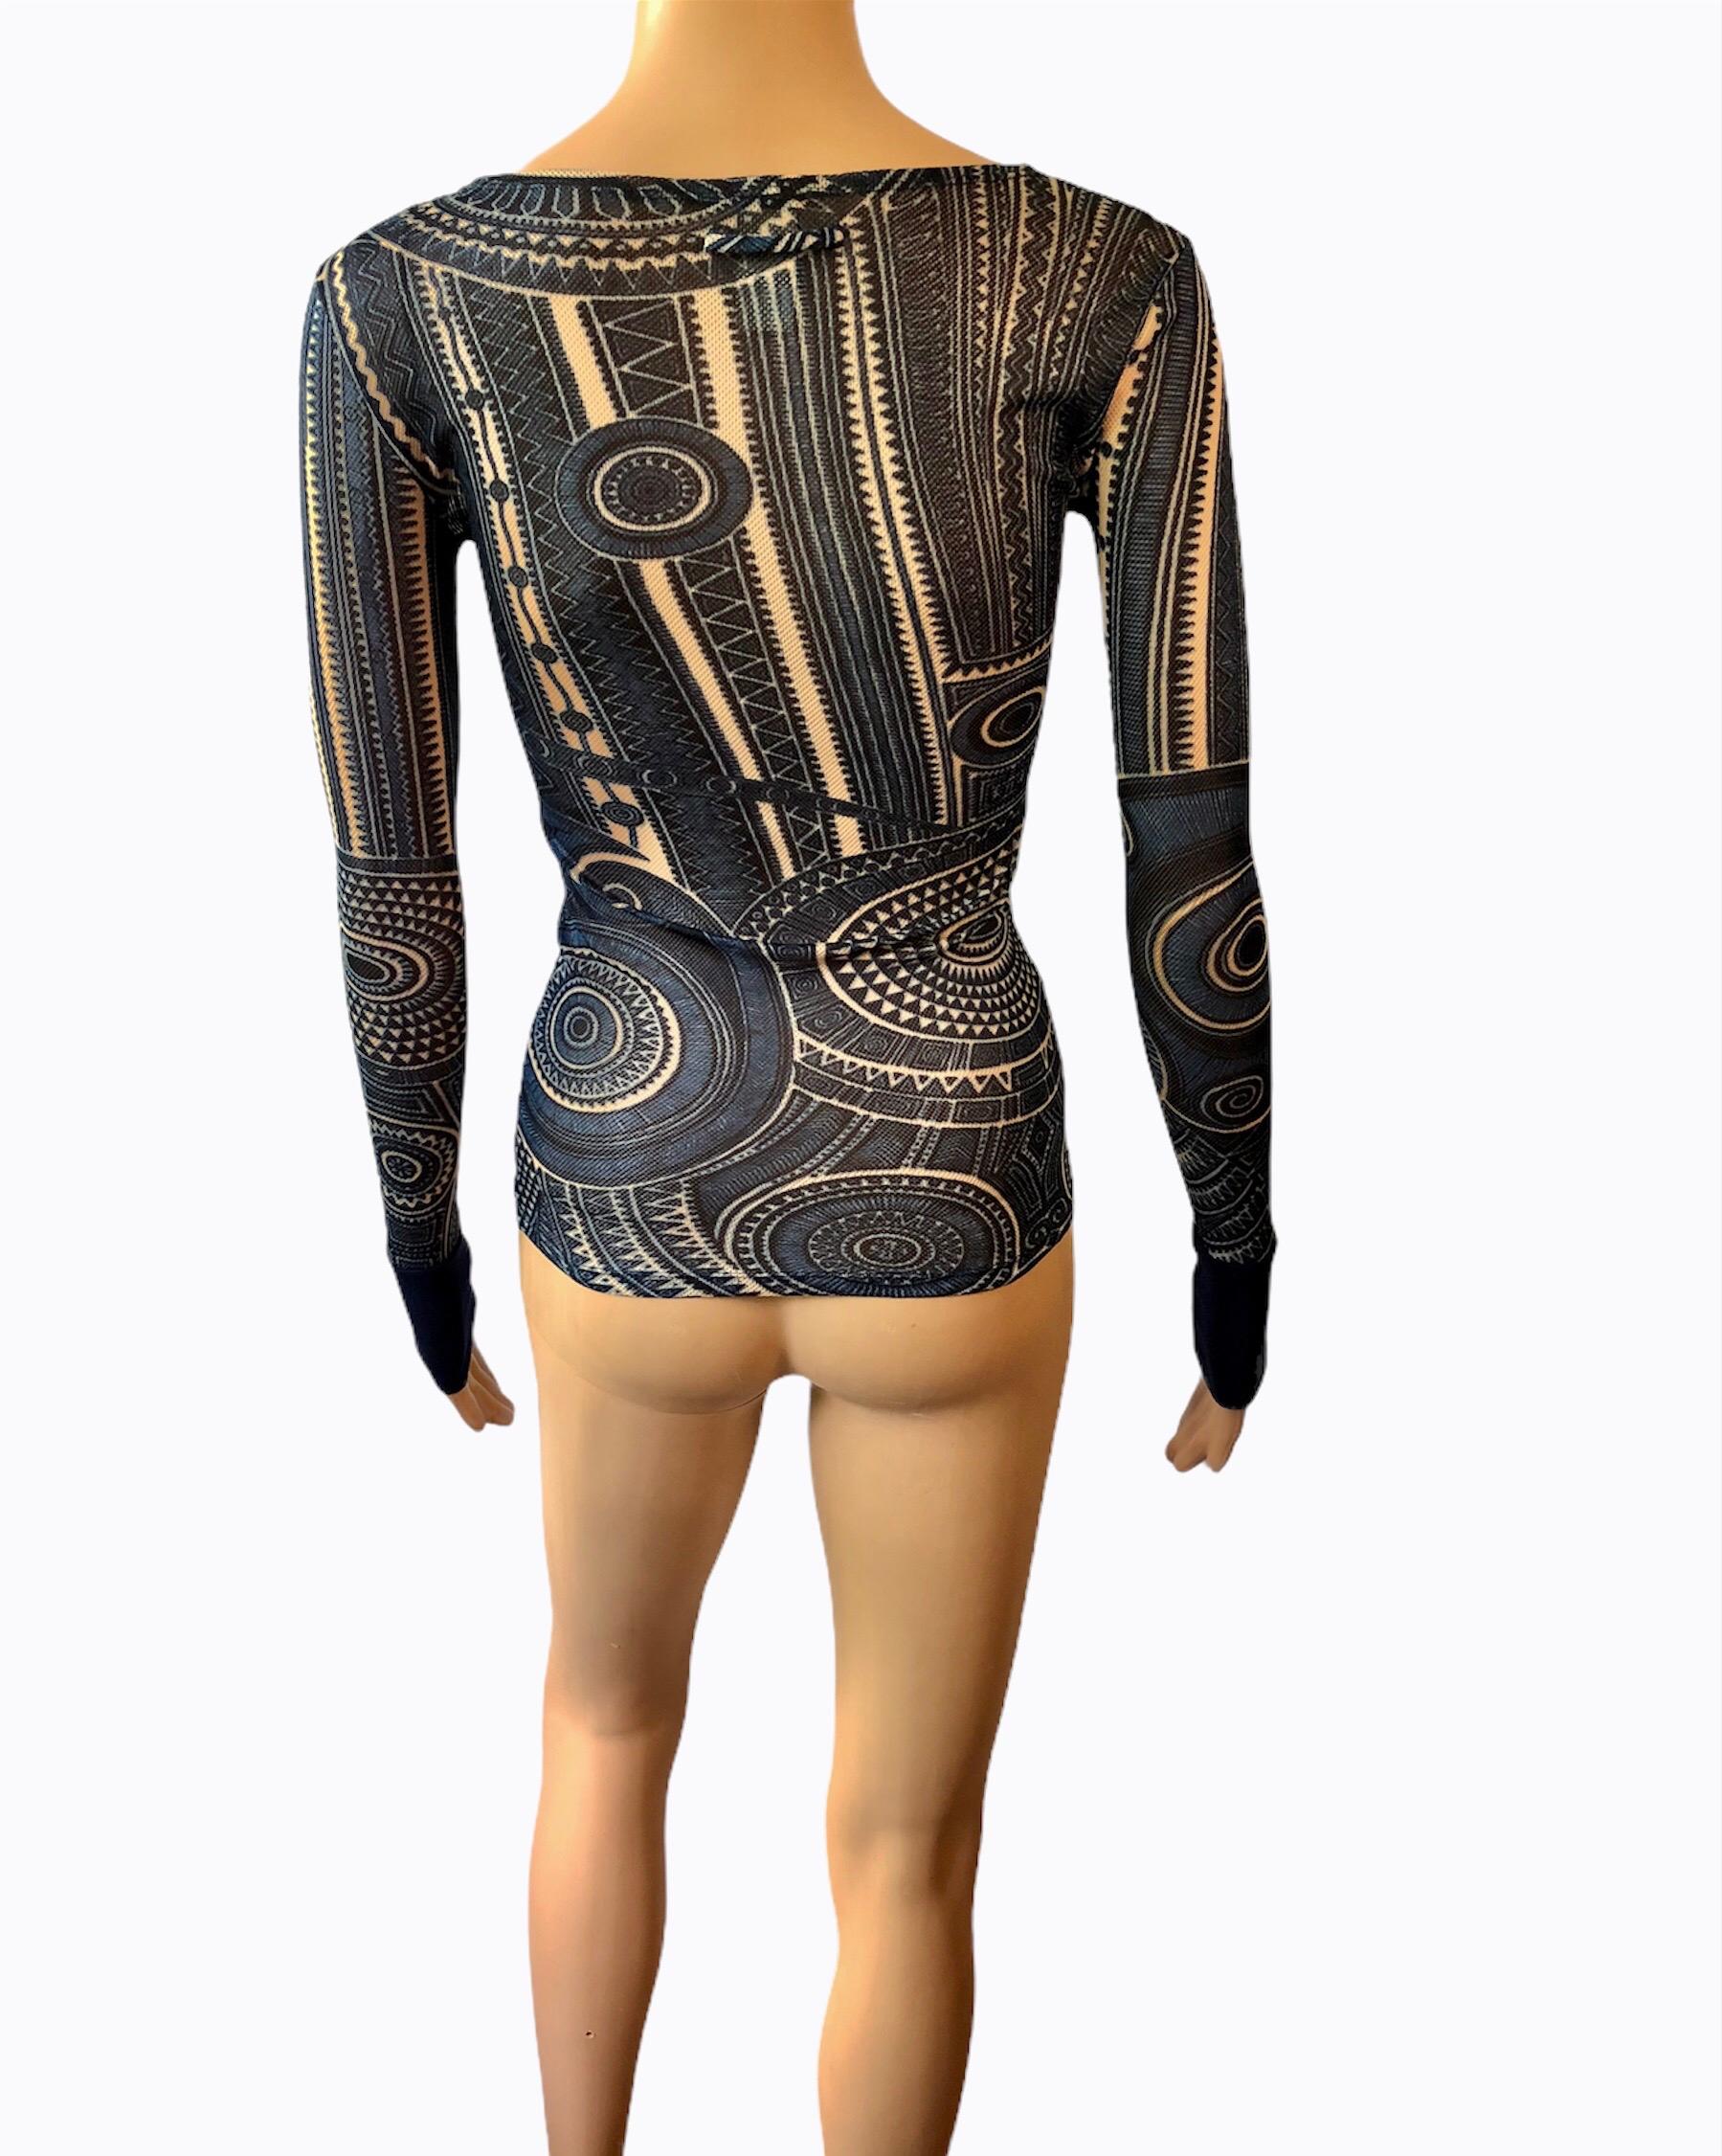 Jean Paul Gaultier Soleil Abstract Print Semi-Sheer Mesh Top In Good Condition For Sale In Naples, FL